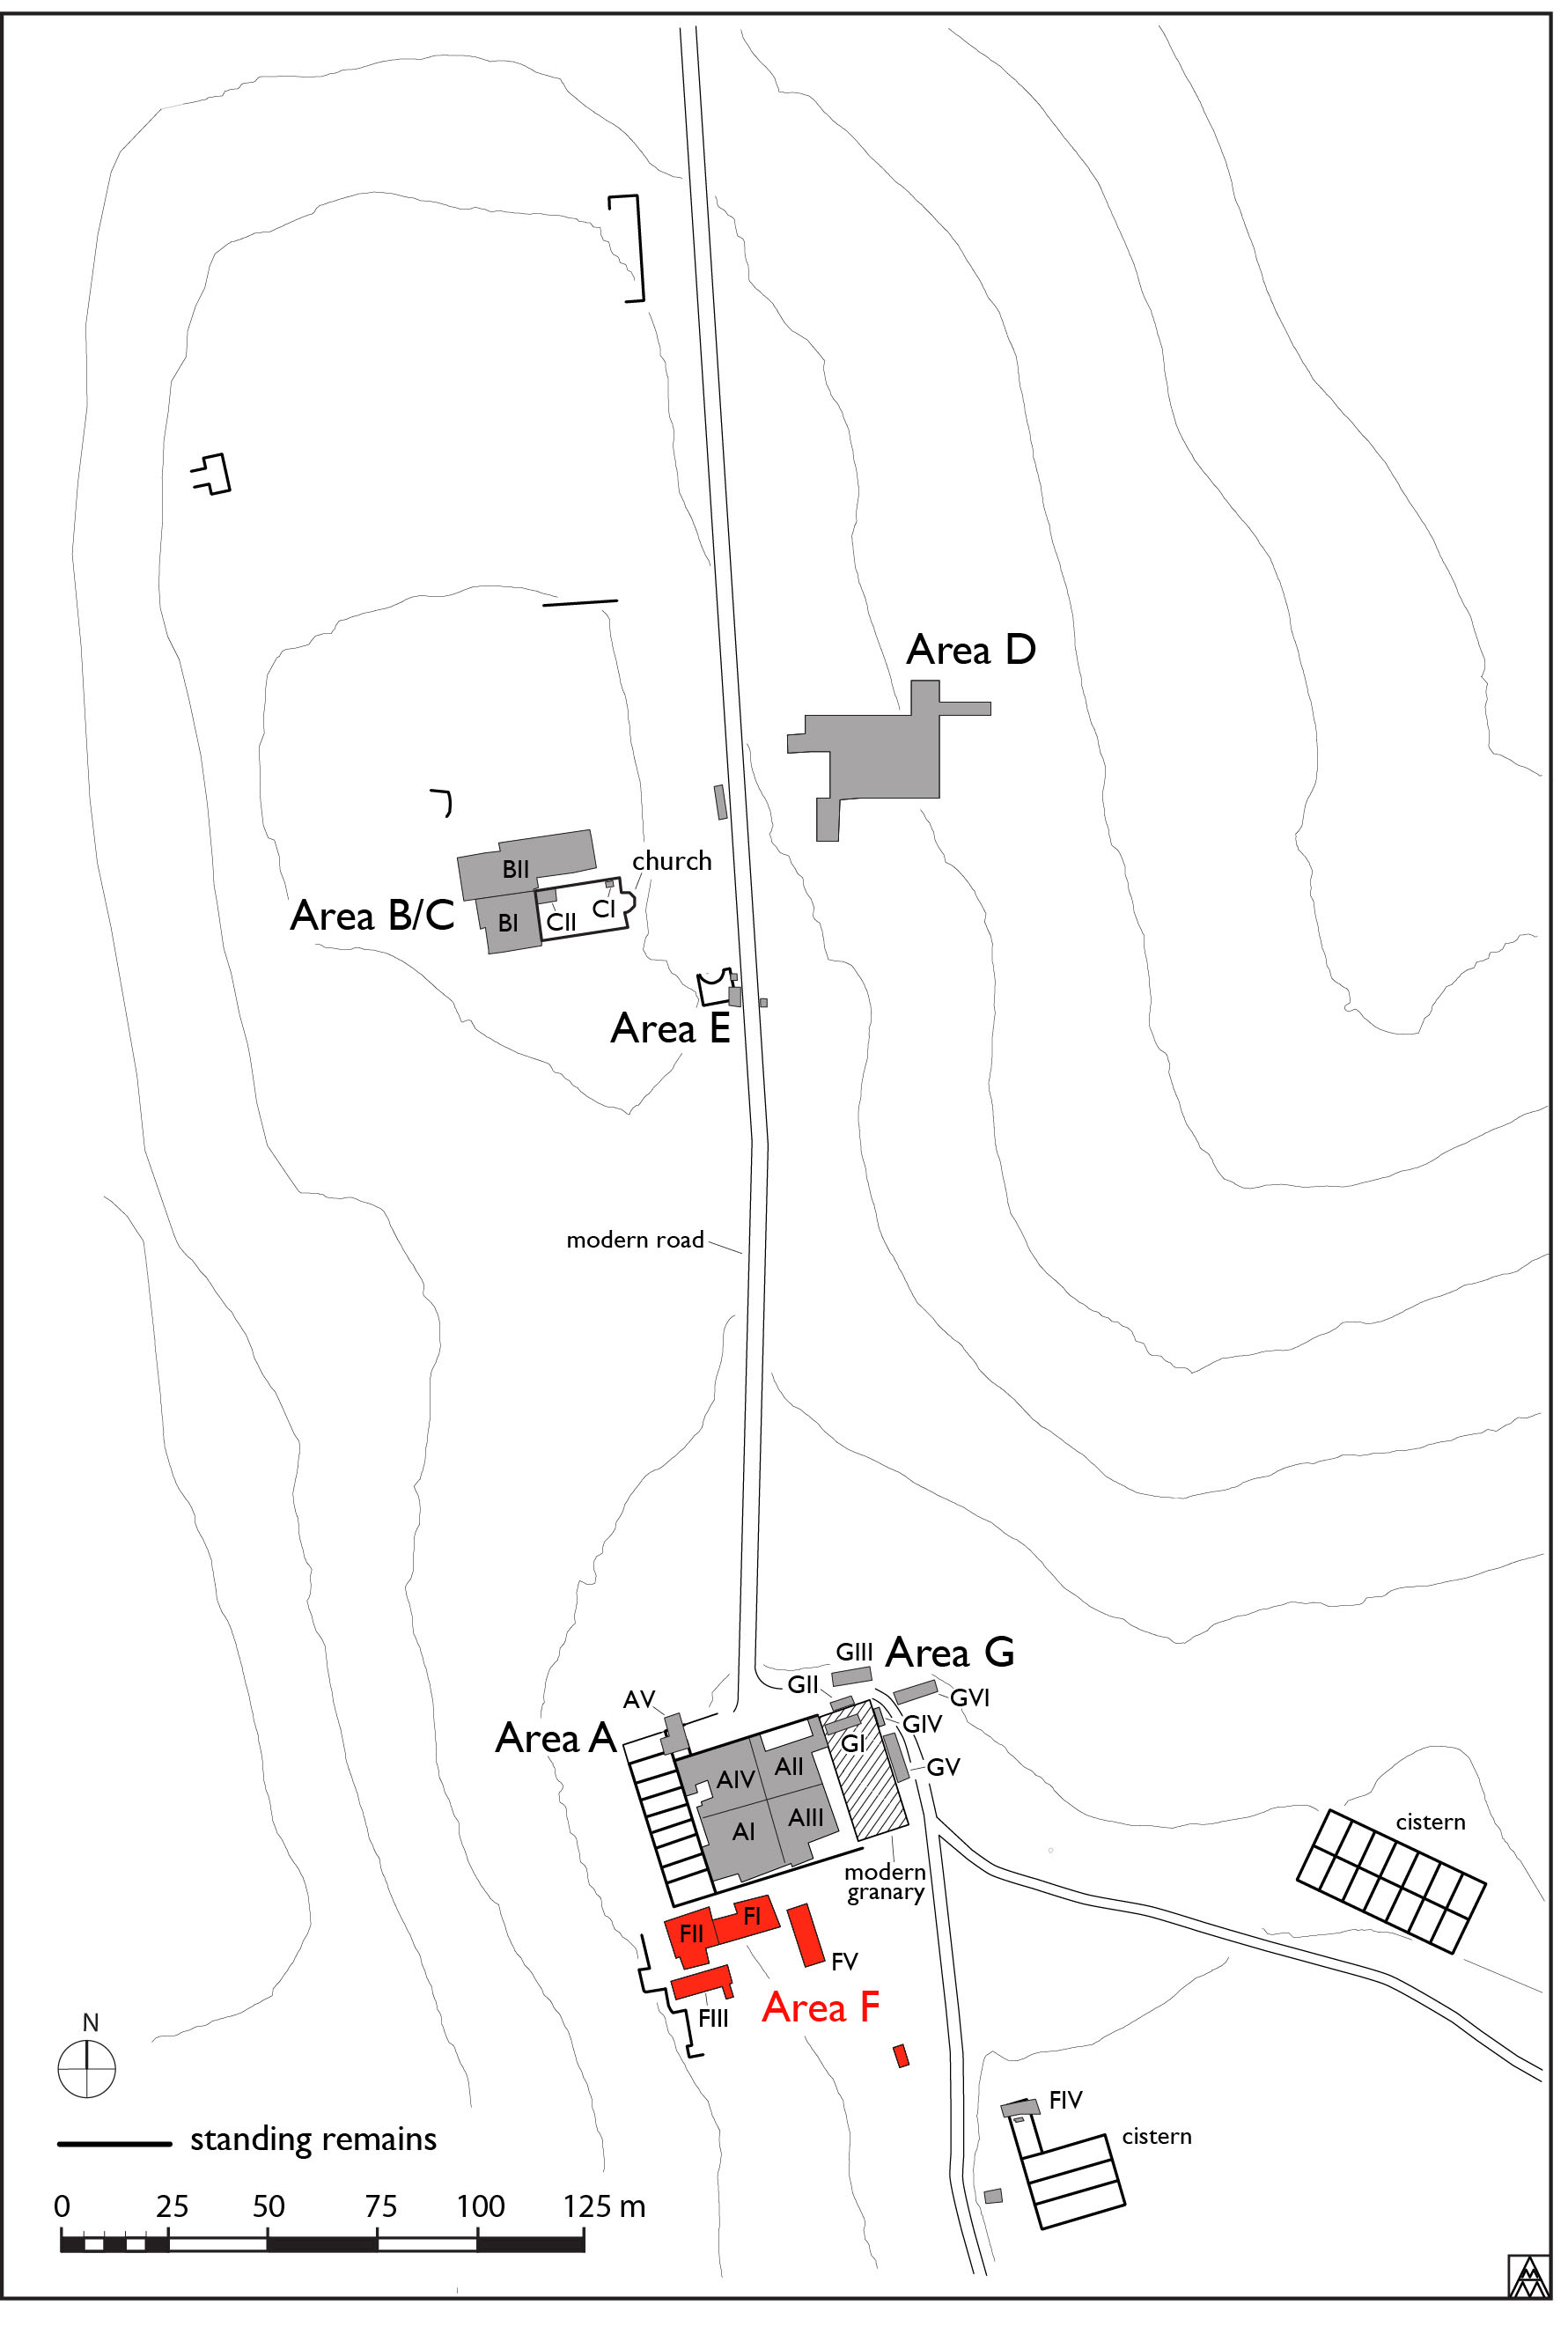 Figure 1. General site plan showing location of Area F (Margaret Andrews).